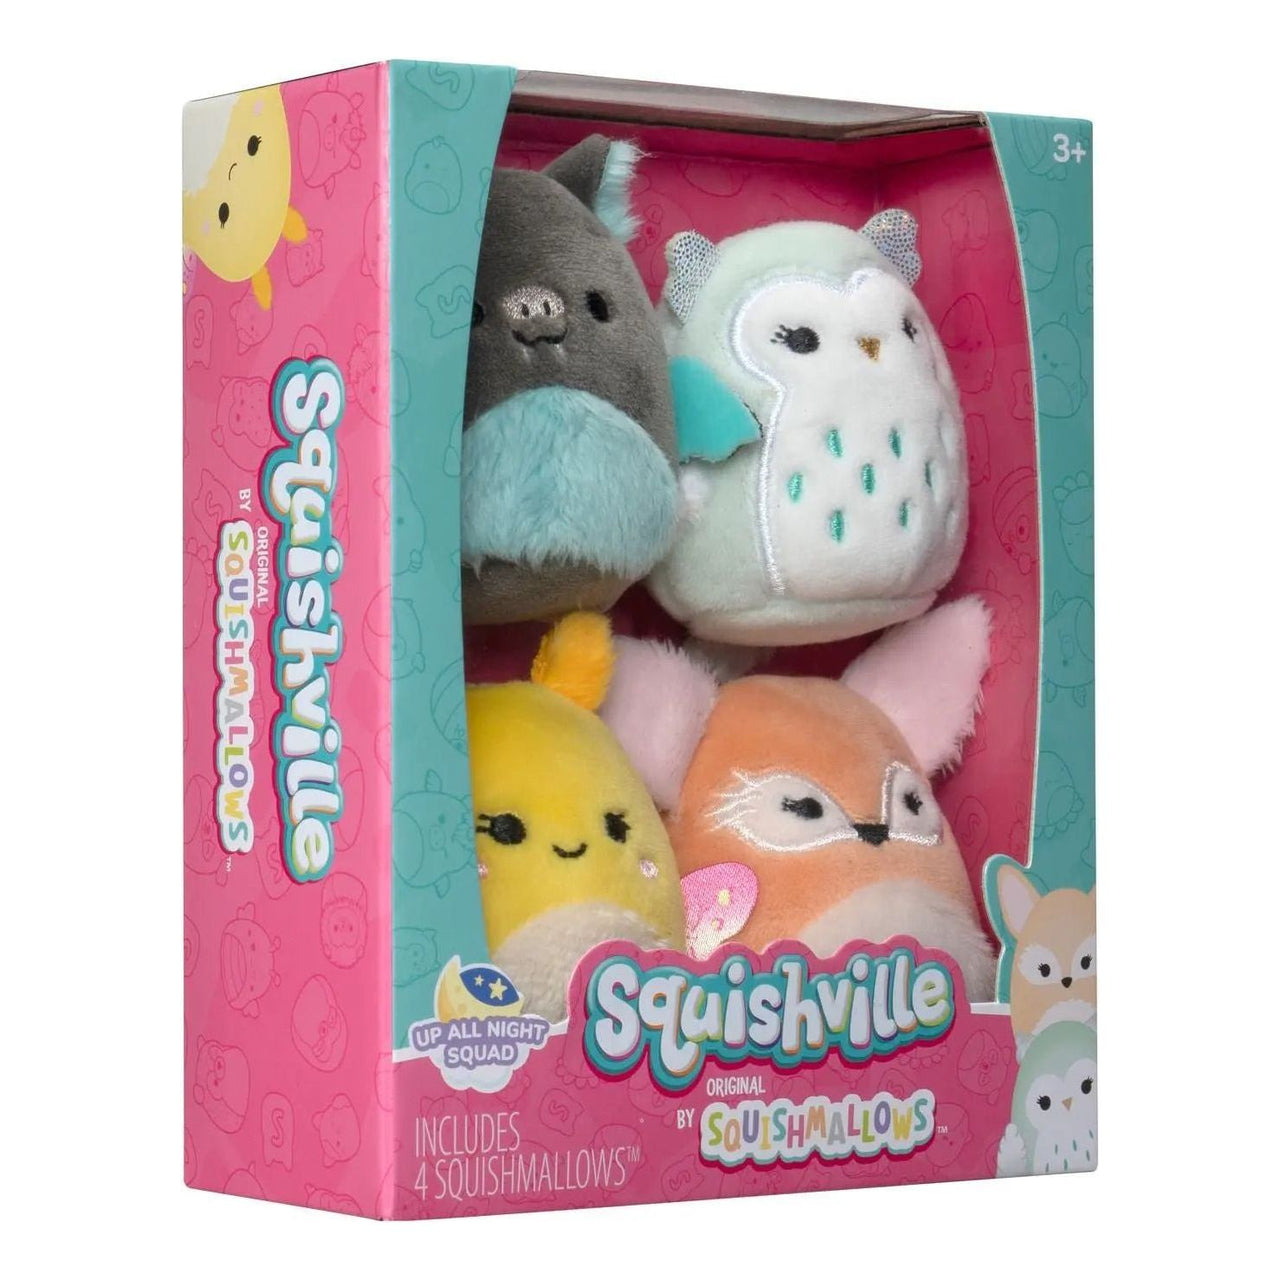 Squishville 2" Up All Night Squad 4 Pack Squishmallows